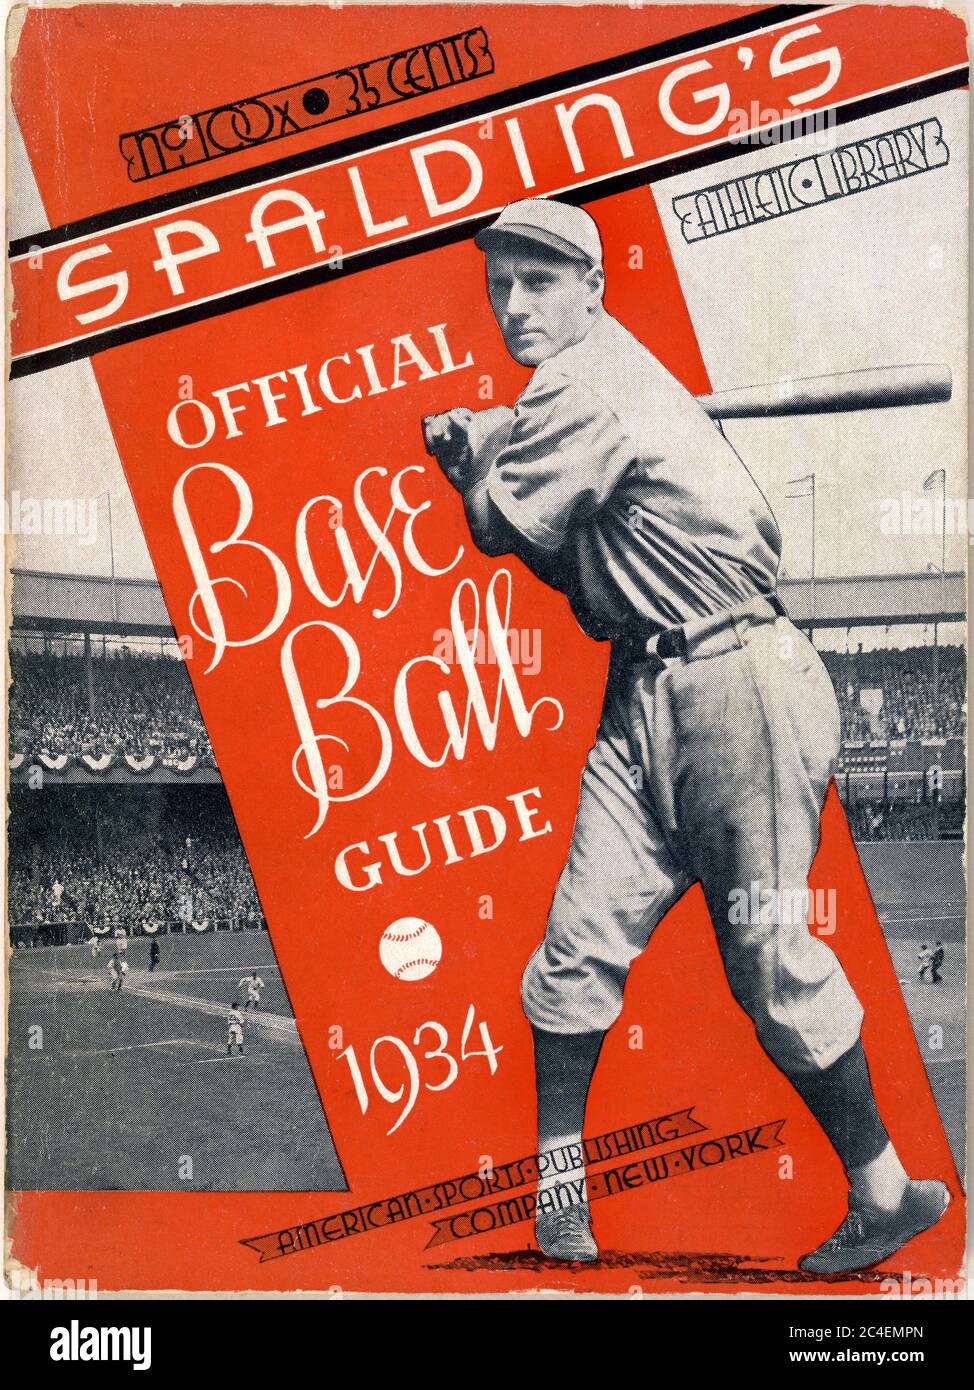 Spalding's Official Baseball Guide, A.G. Spalding & Bros., American Sports Publishing Company, 1934 Stockfoto